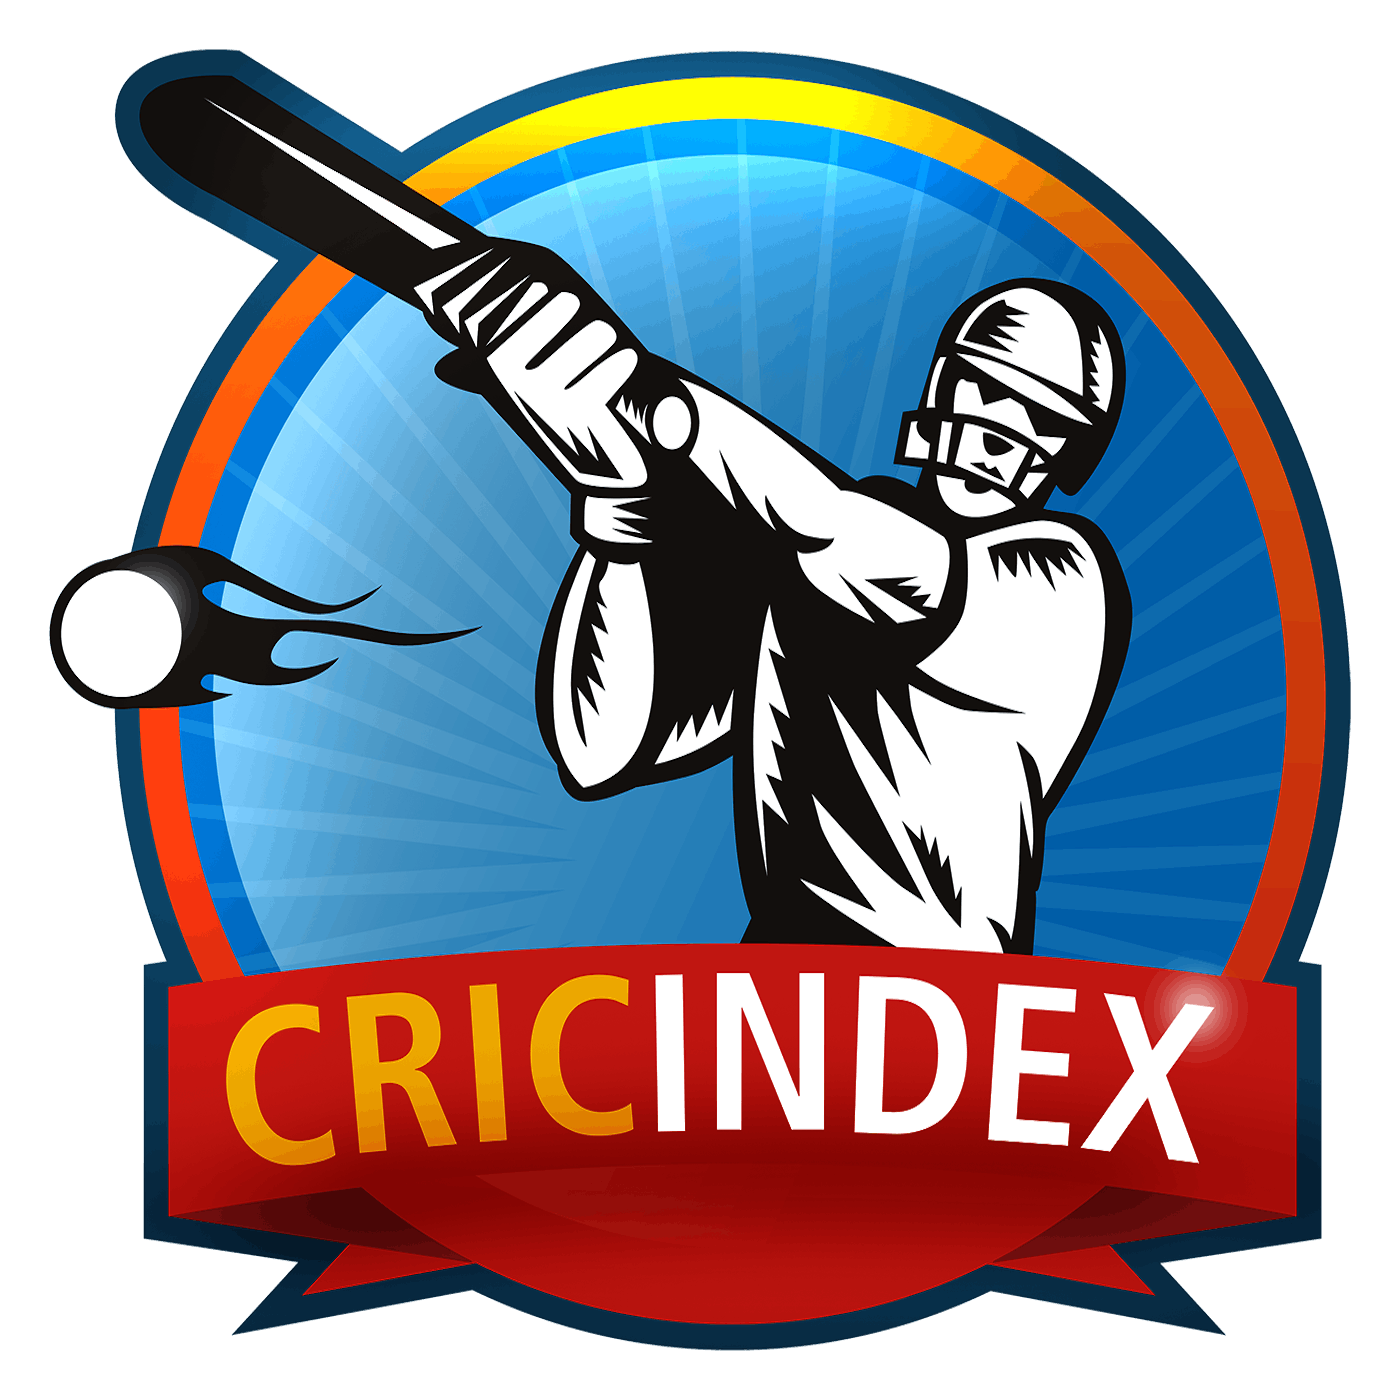 India Edge Closer to World Cup Victory - CricIndex